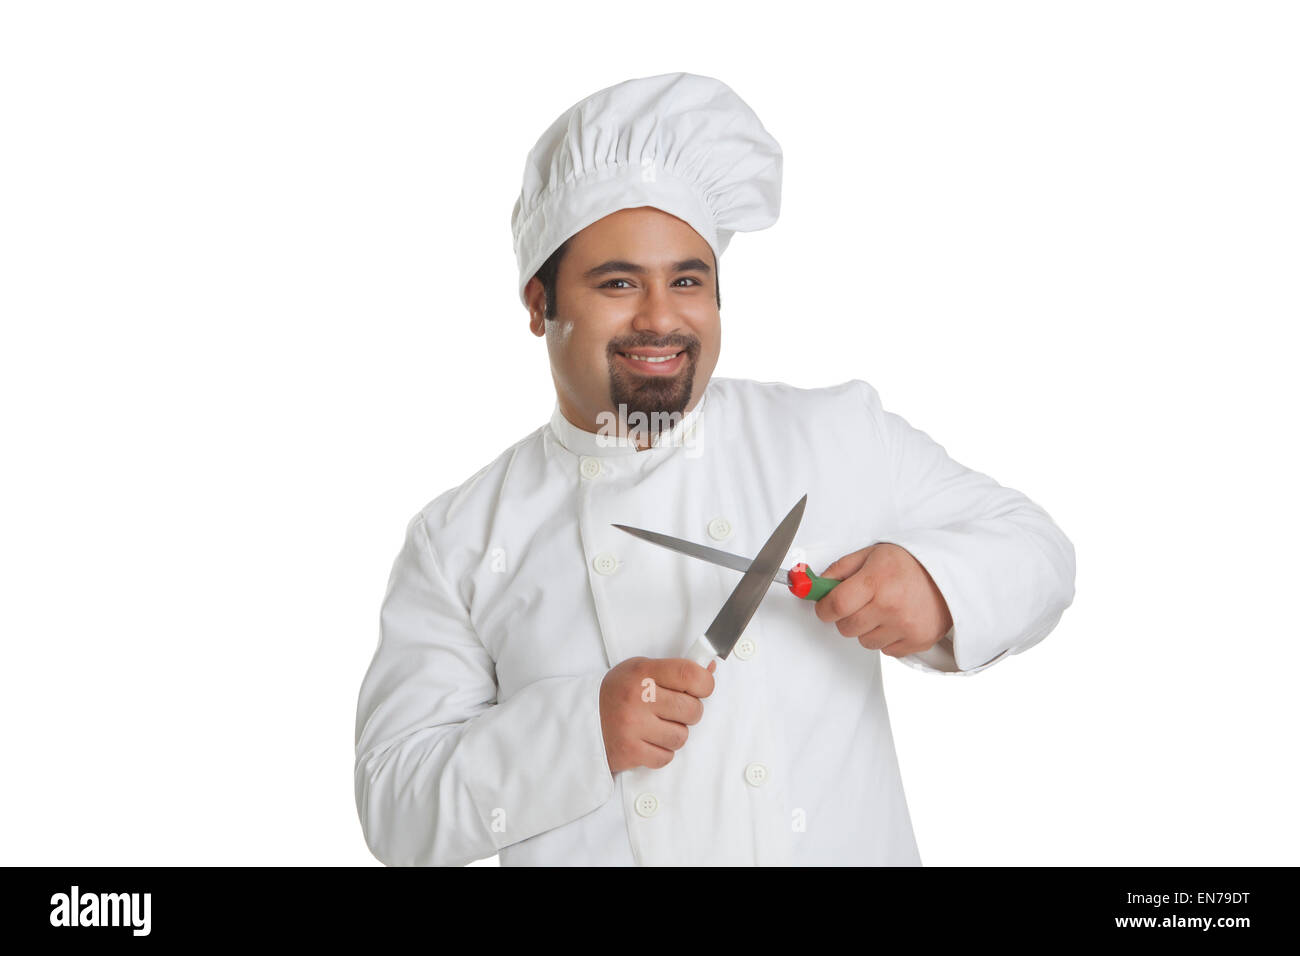 Portrait of chef sharpening knives Stock Photo